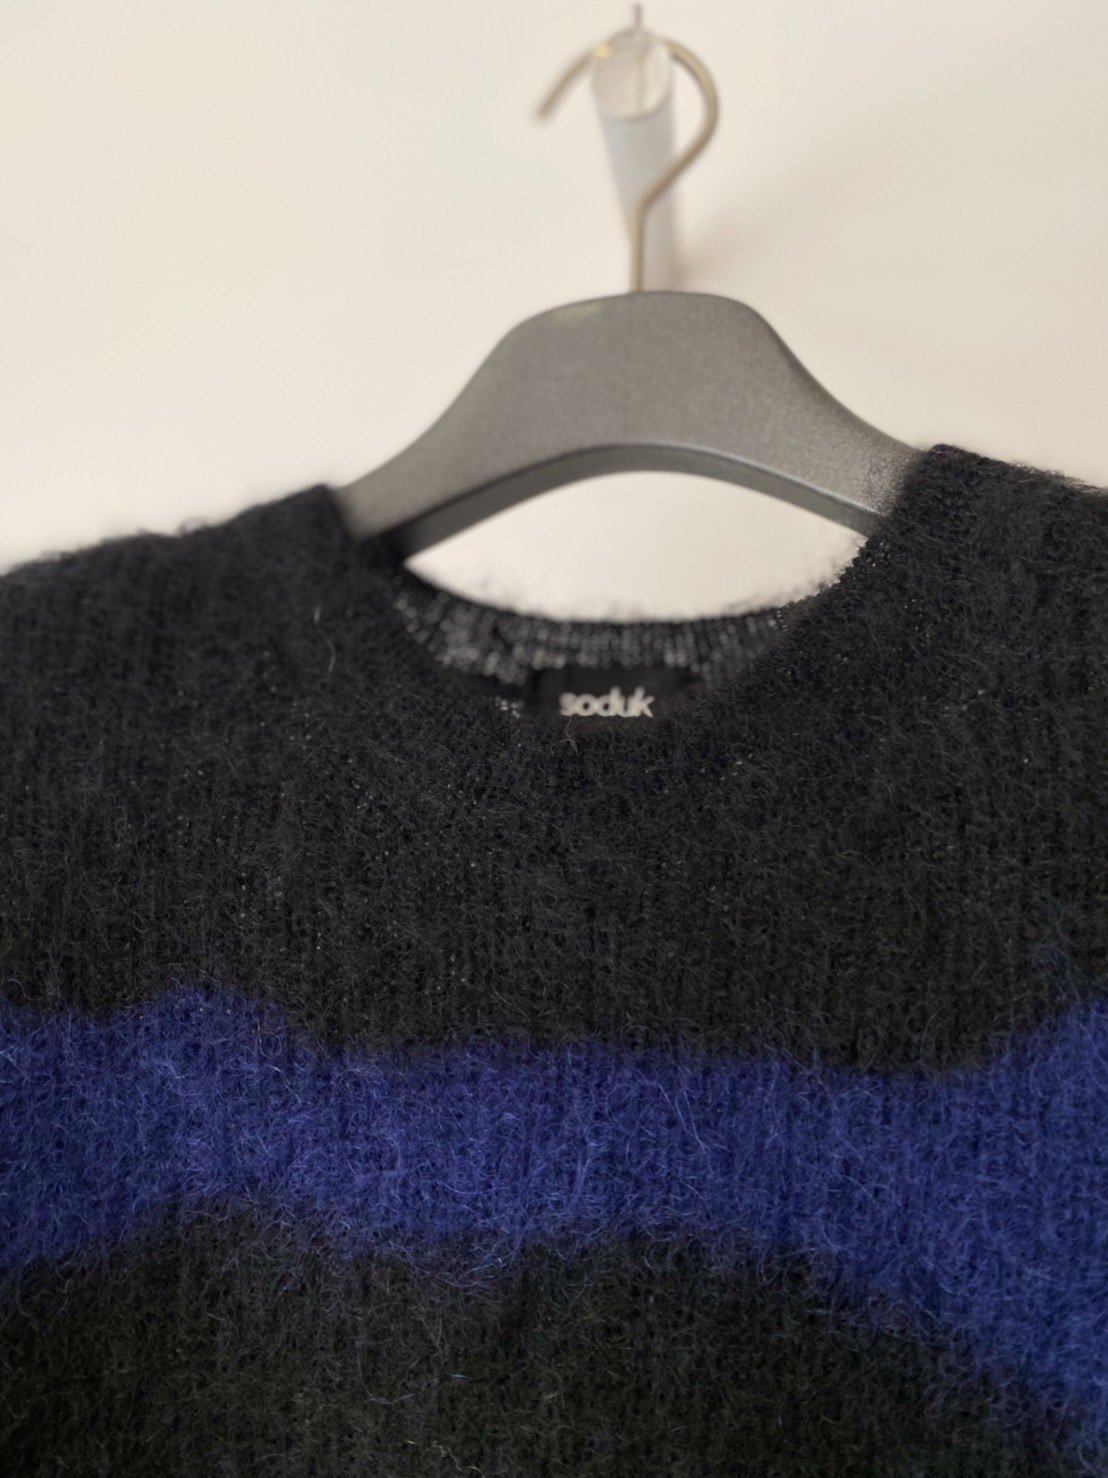 soduk<br />drawing knit top / black<img class='new_mark_img2' src='https://img.shop-pro.jp/img/new/icons14.gif' style='border:none;display:inline;margin:0px;padding:0px;width:auto;' />